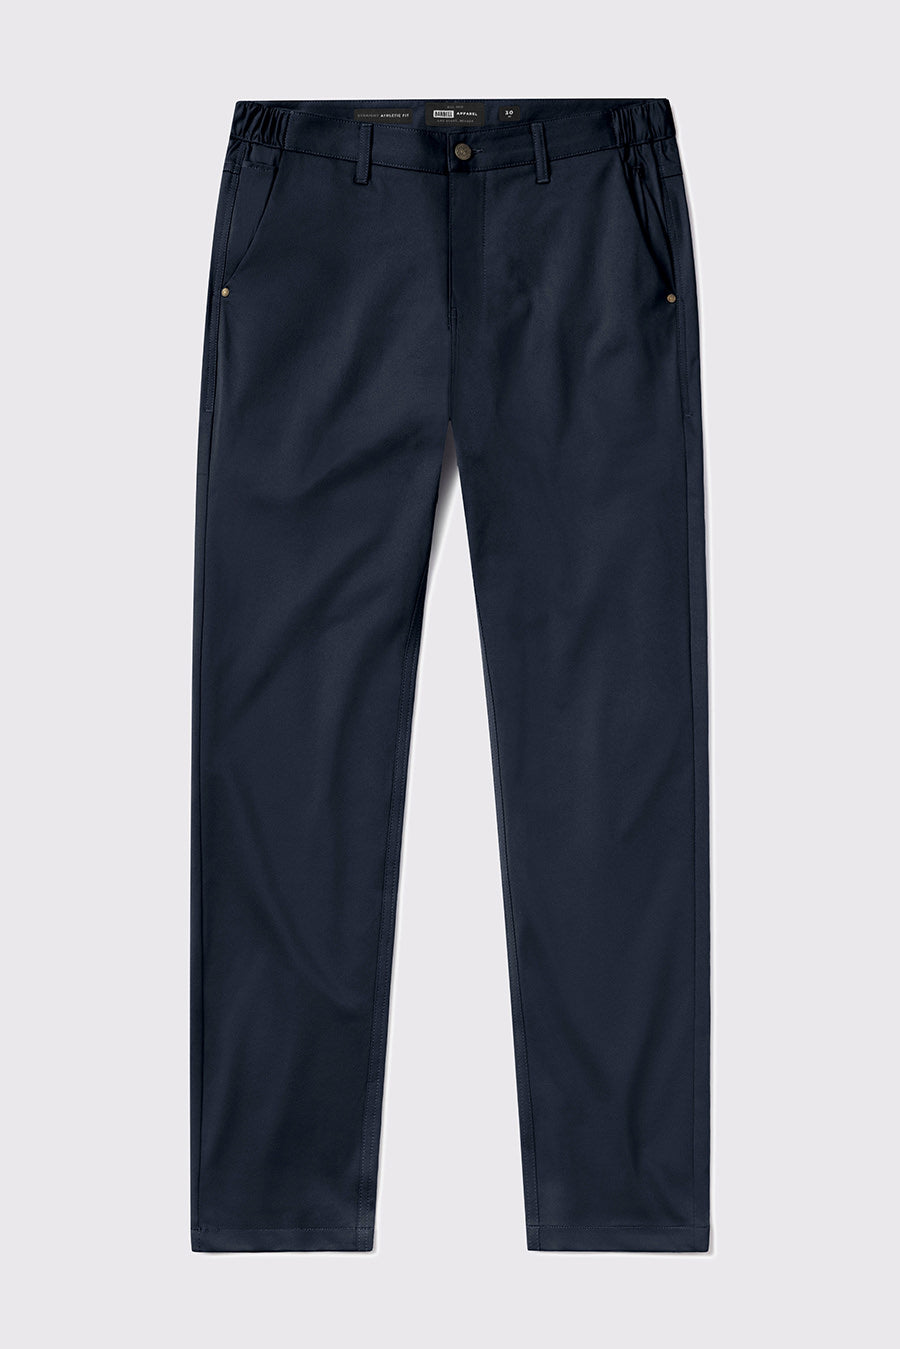 Buy Navy Trousers & Pants for Men by UNSIZED Online | Ajio.com